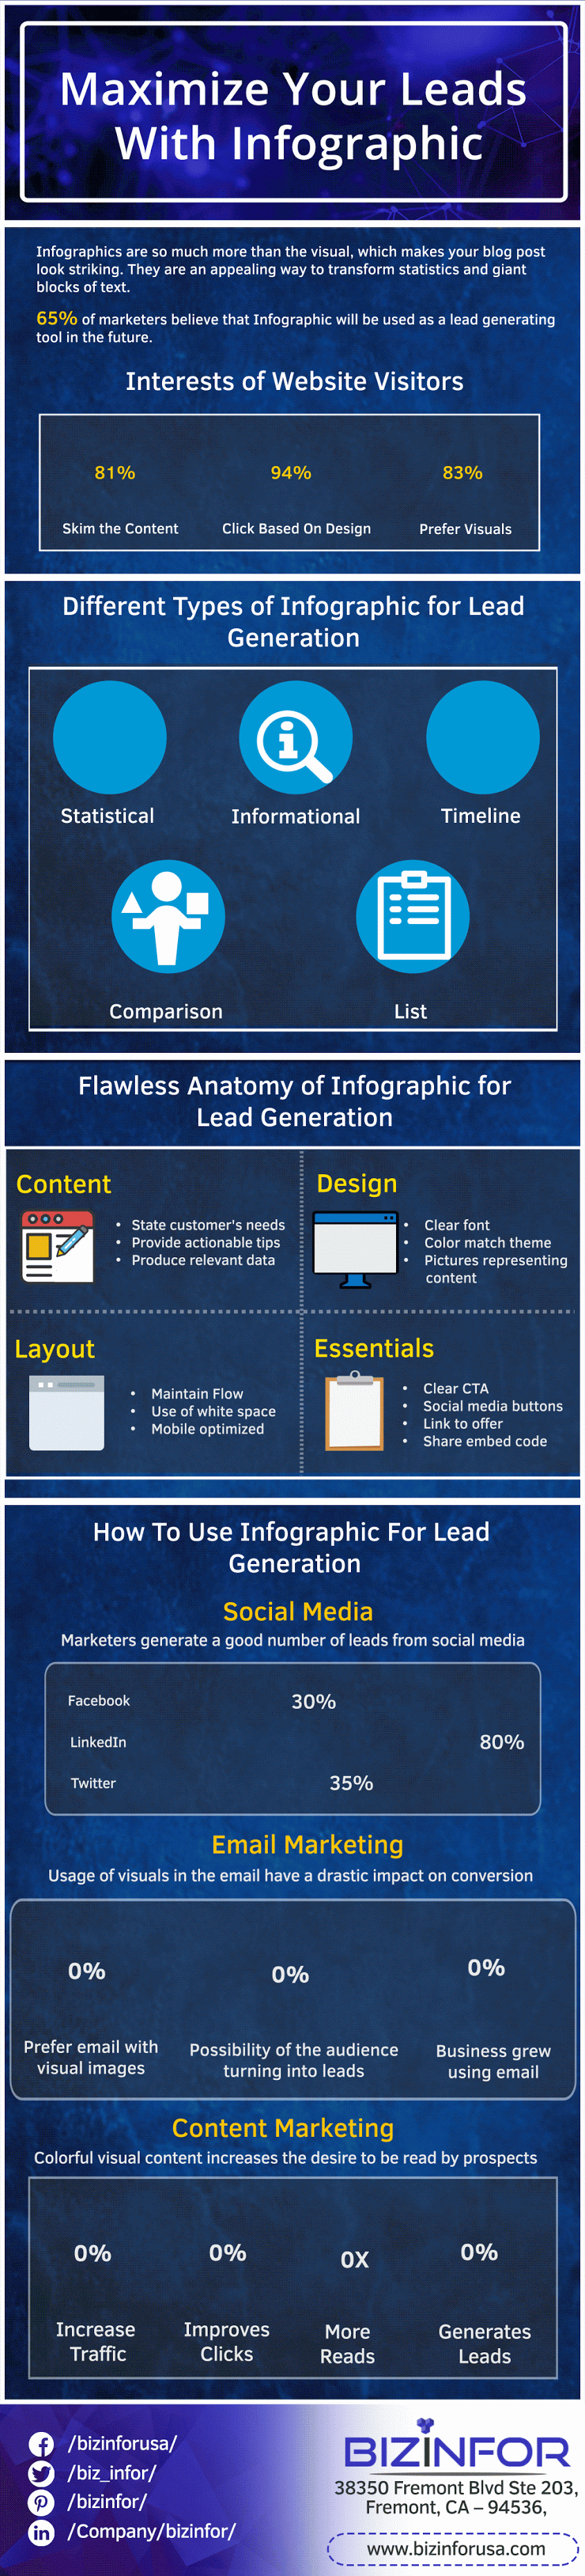 How to Use Infographics for Lead Generation #infographic